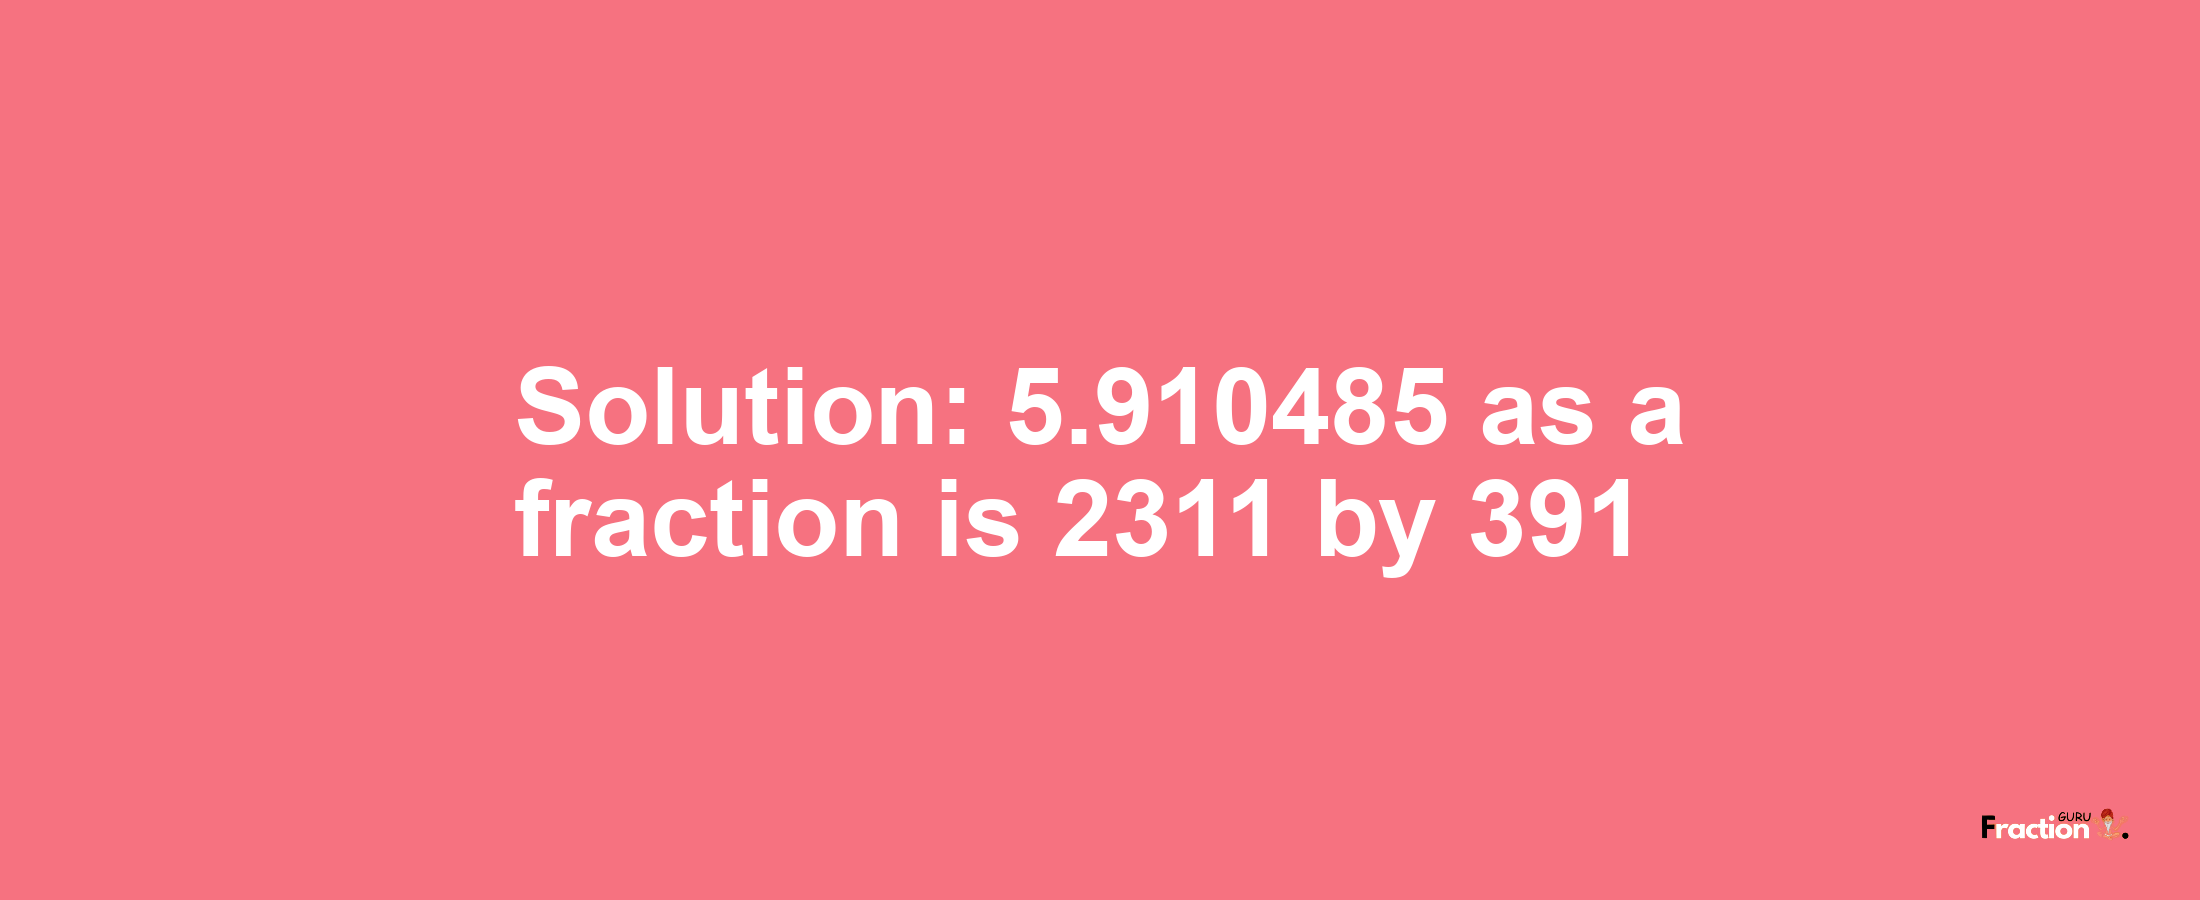 Solution:5.910485 as a fraction is 2311/391